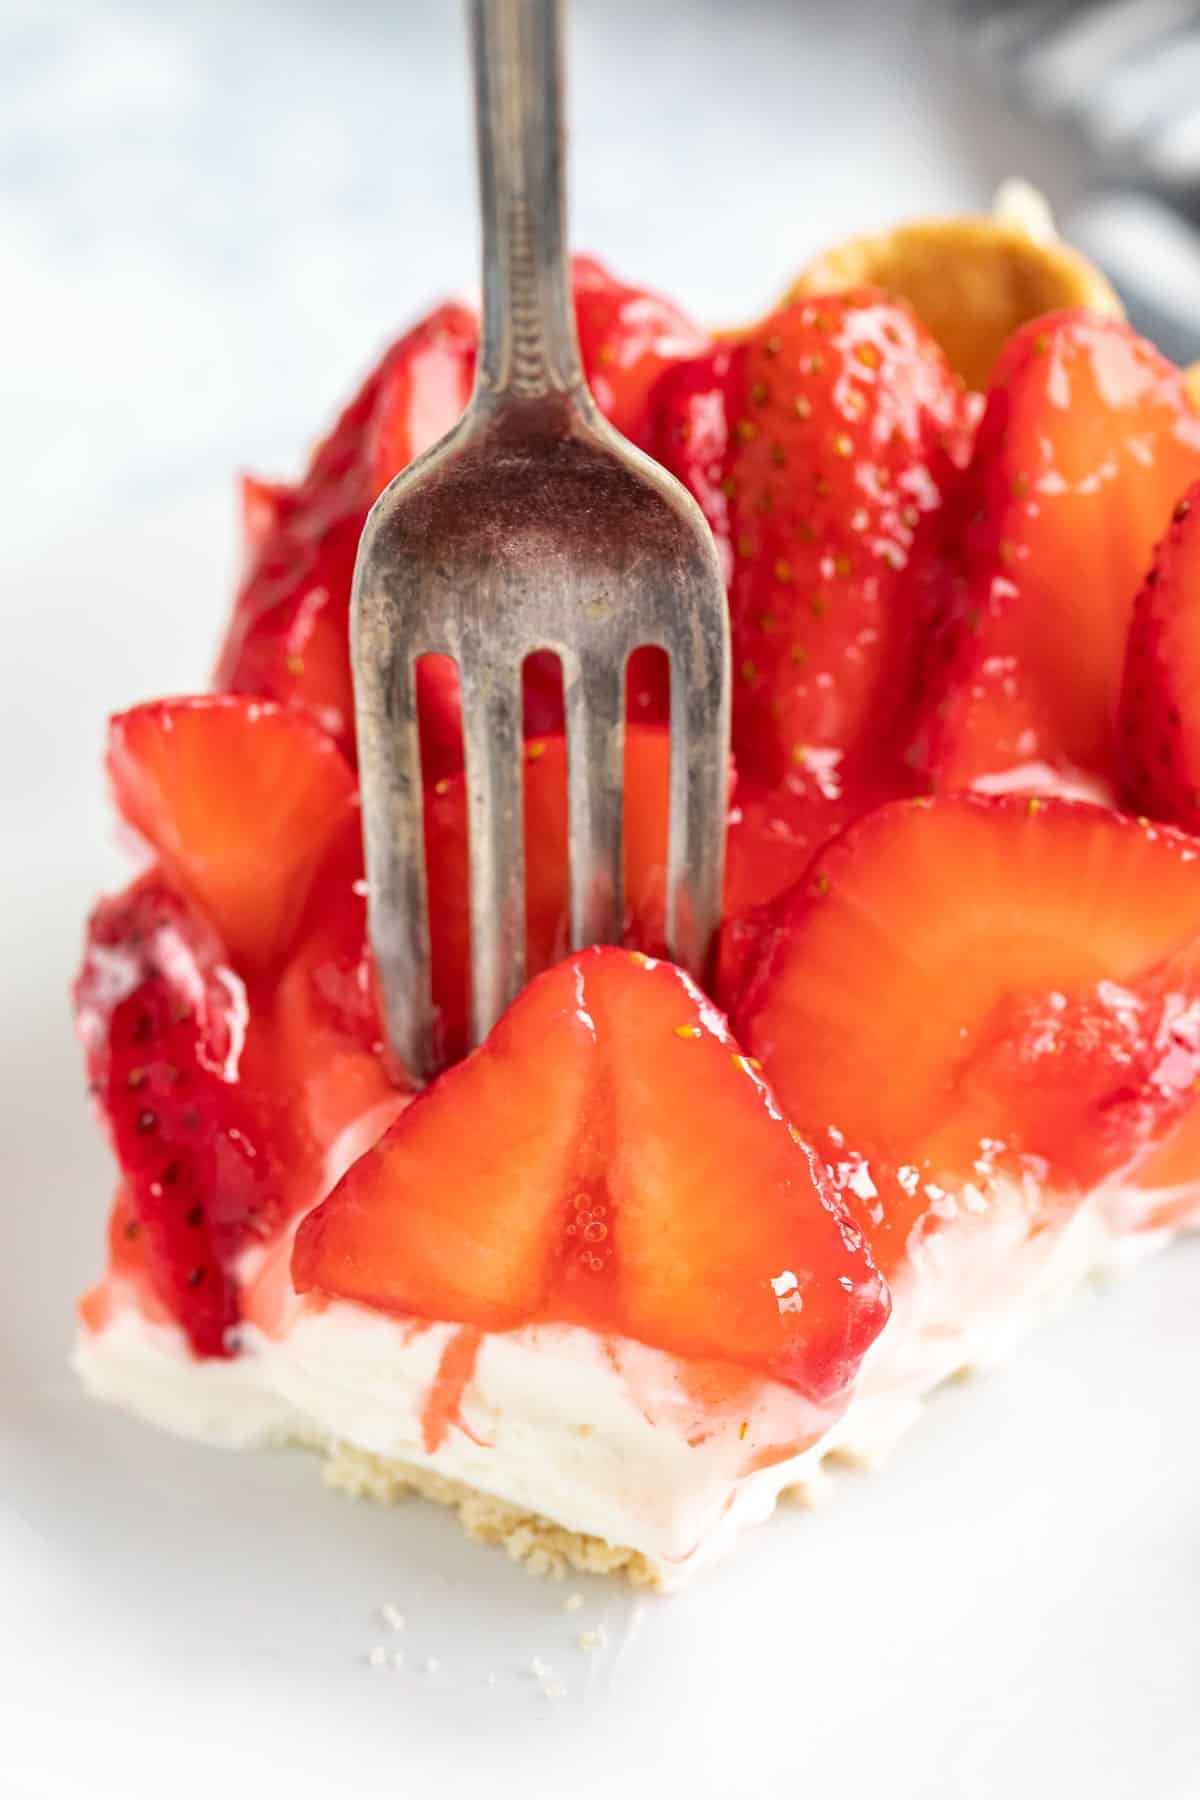 A close up image of a fork piercing into the strawberry pie with cream cheese.